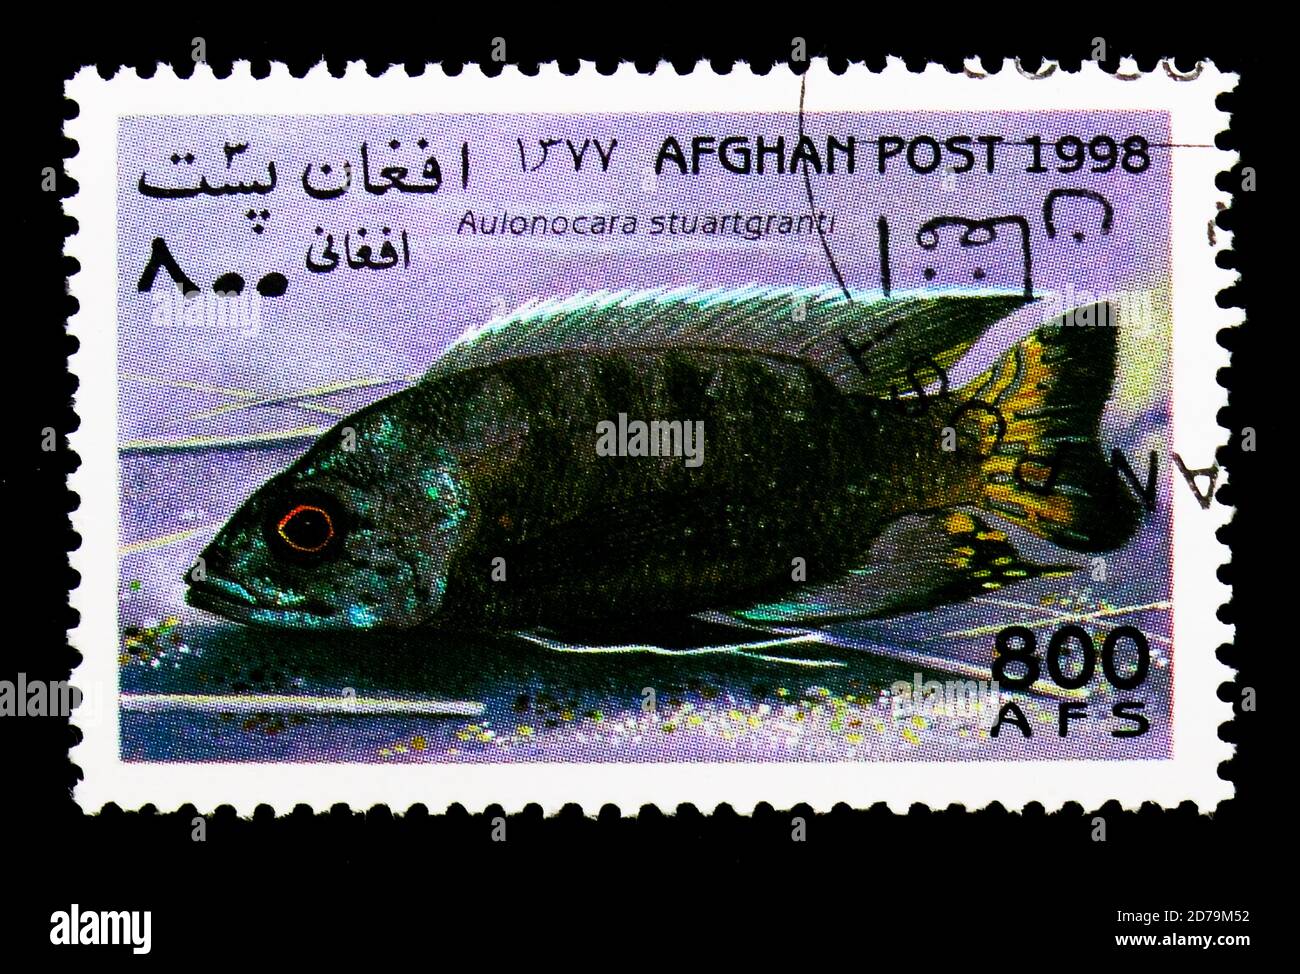 MOSCOW, RUSSIA - DECEMBER 21, 2017: A stamp printed in Afghanistan shows Flavescent peacock (Aulonocara stuartgranti), Fish serie, circa 1998 Stock Photo